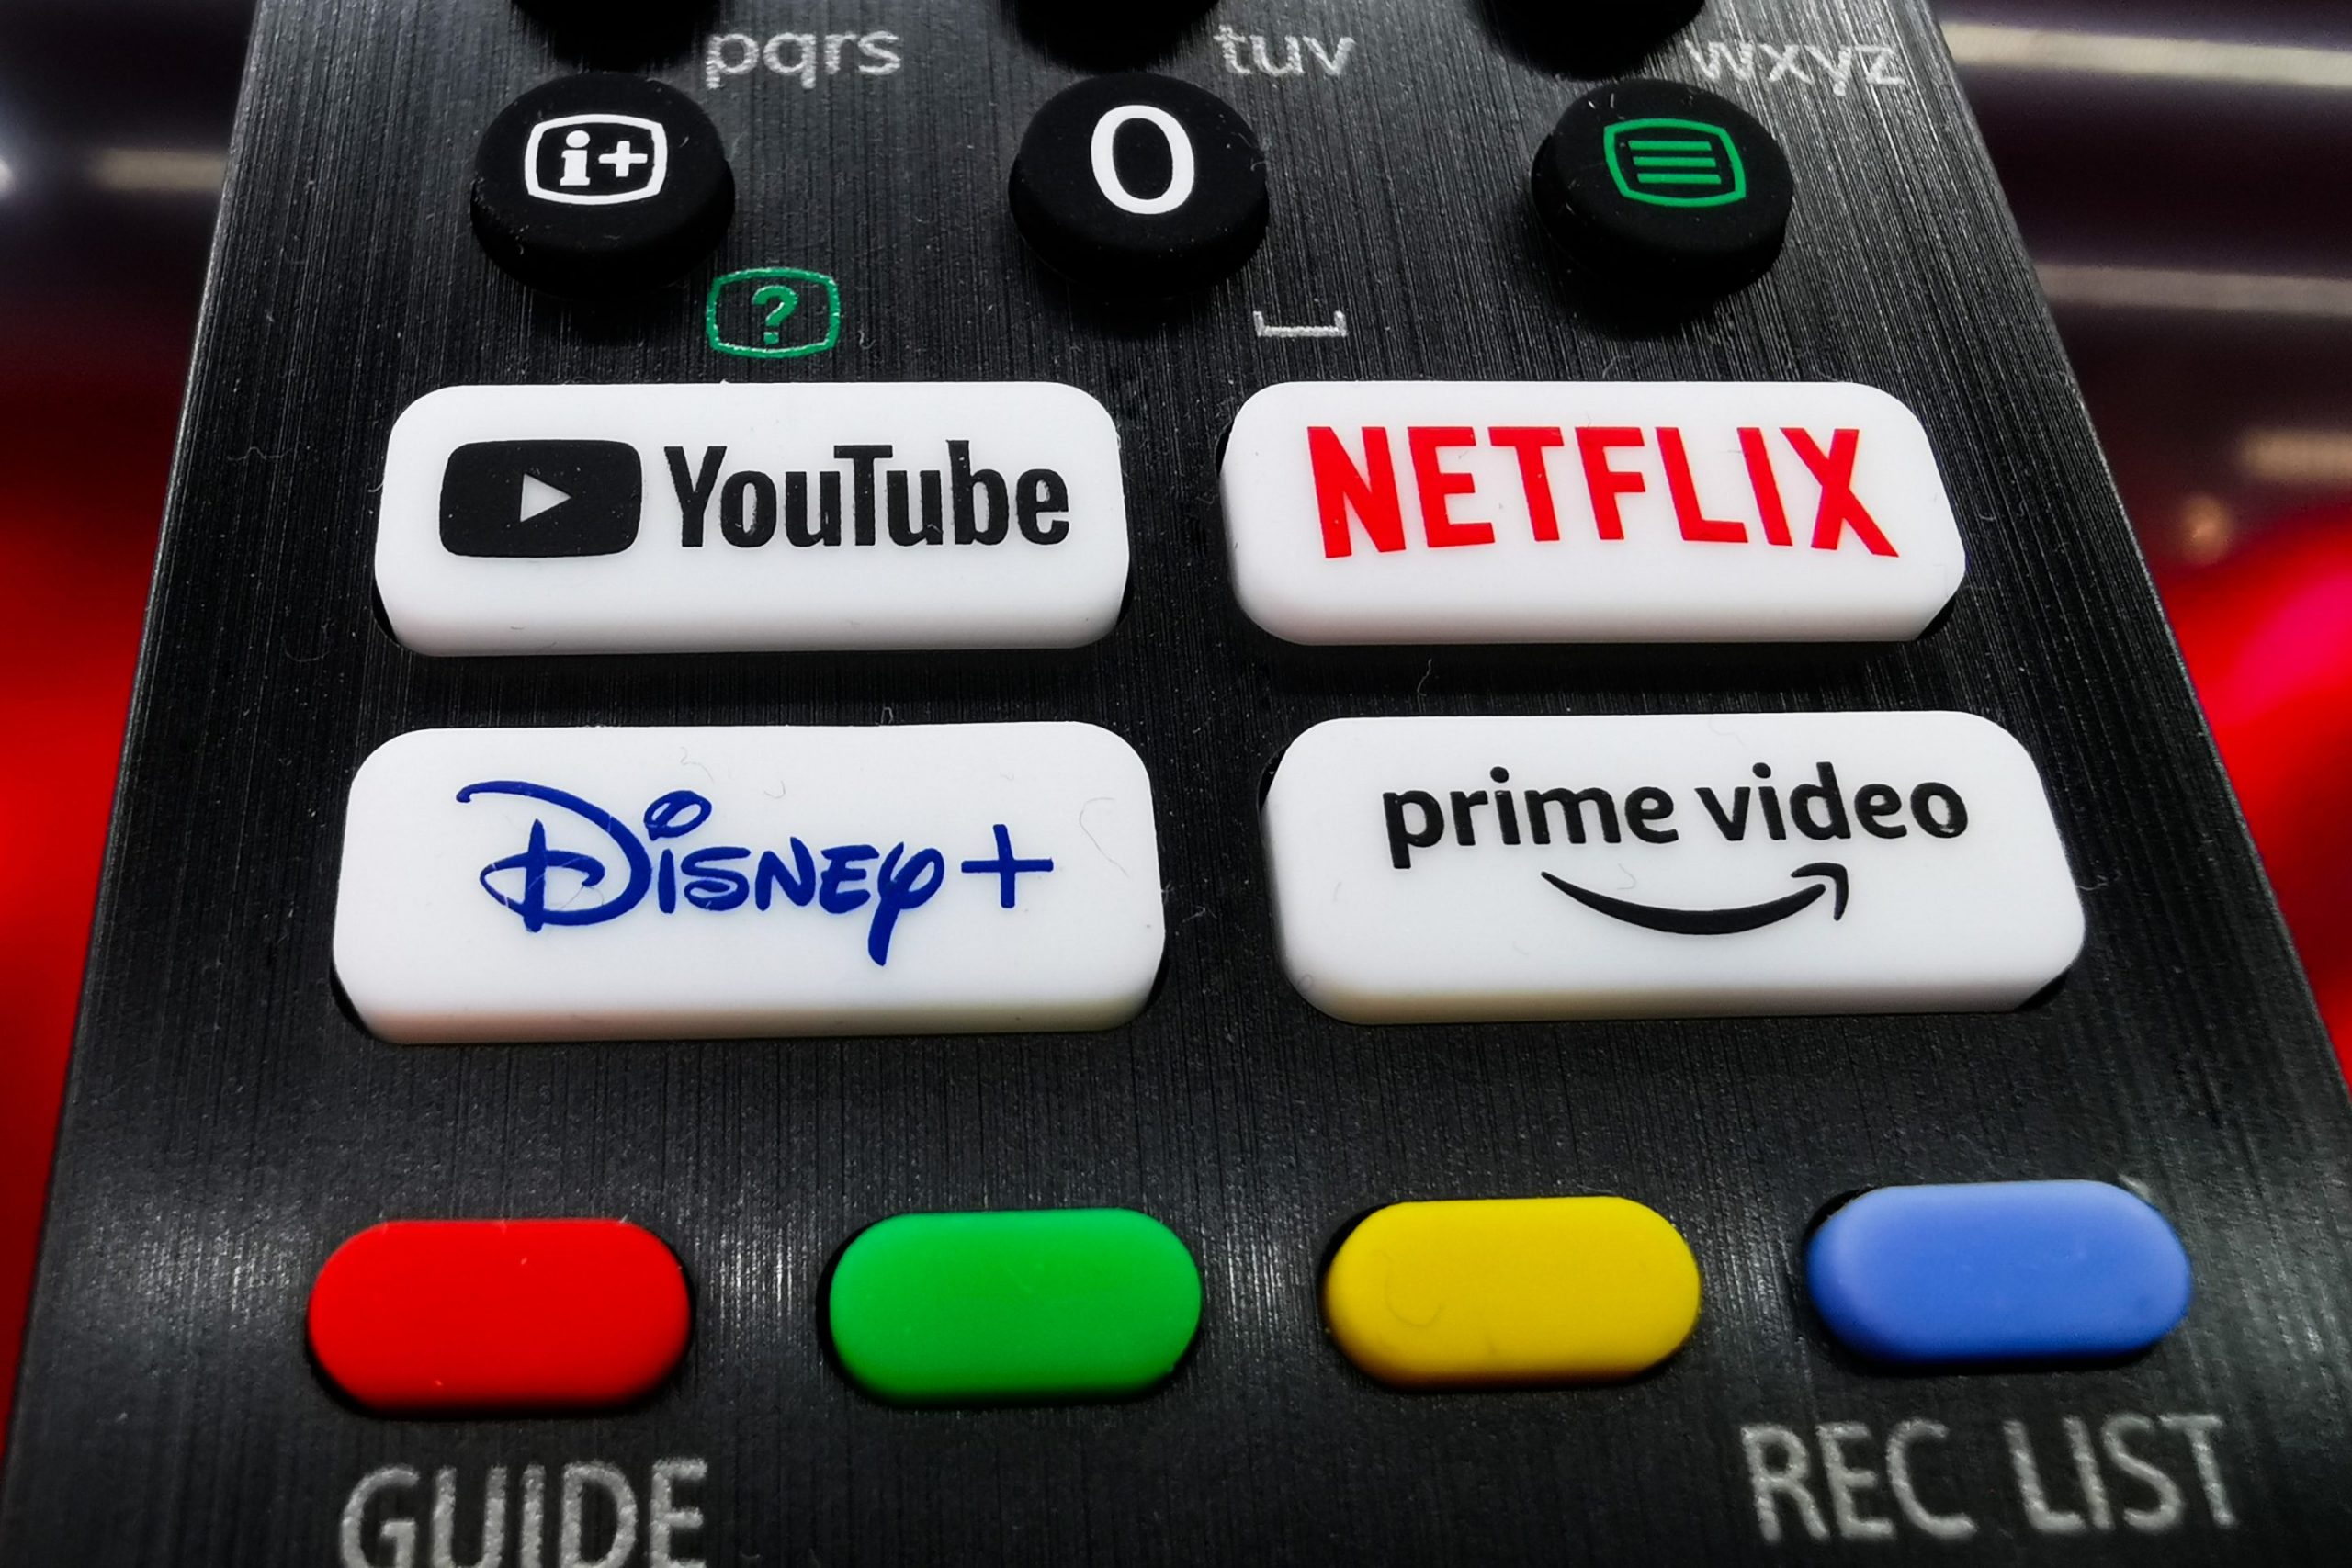 Disney+ seen as the most expendable streaming service as inflation bites